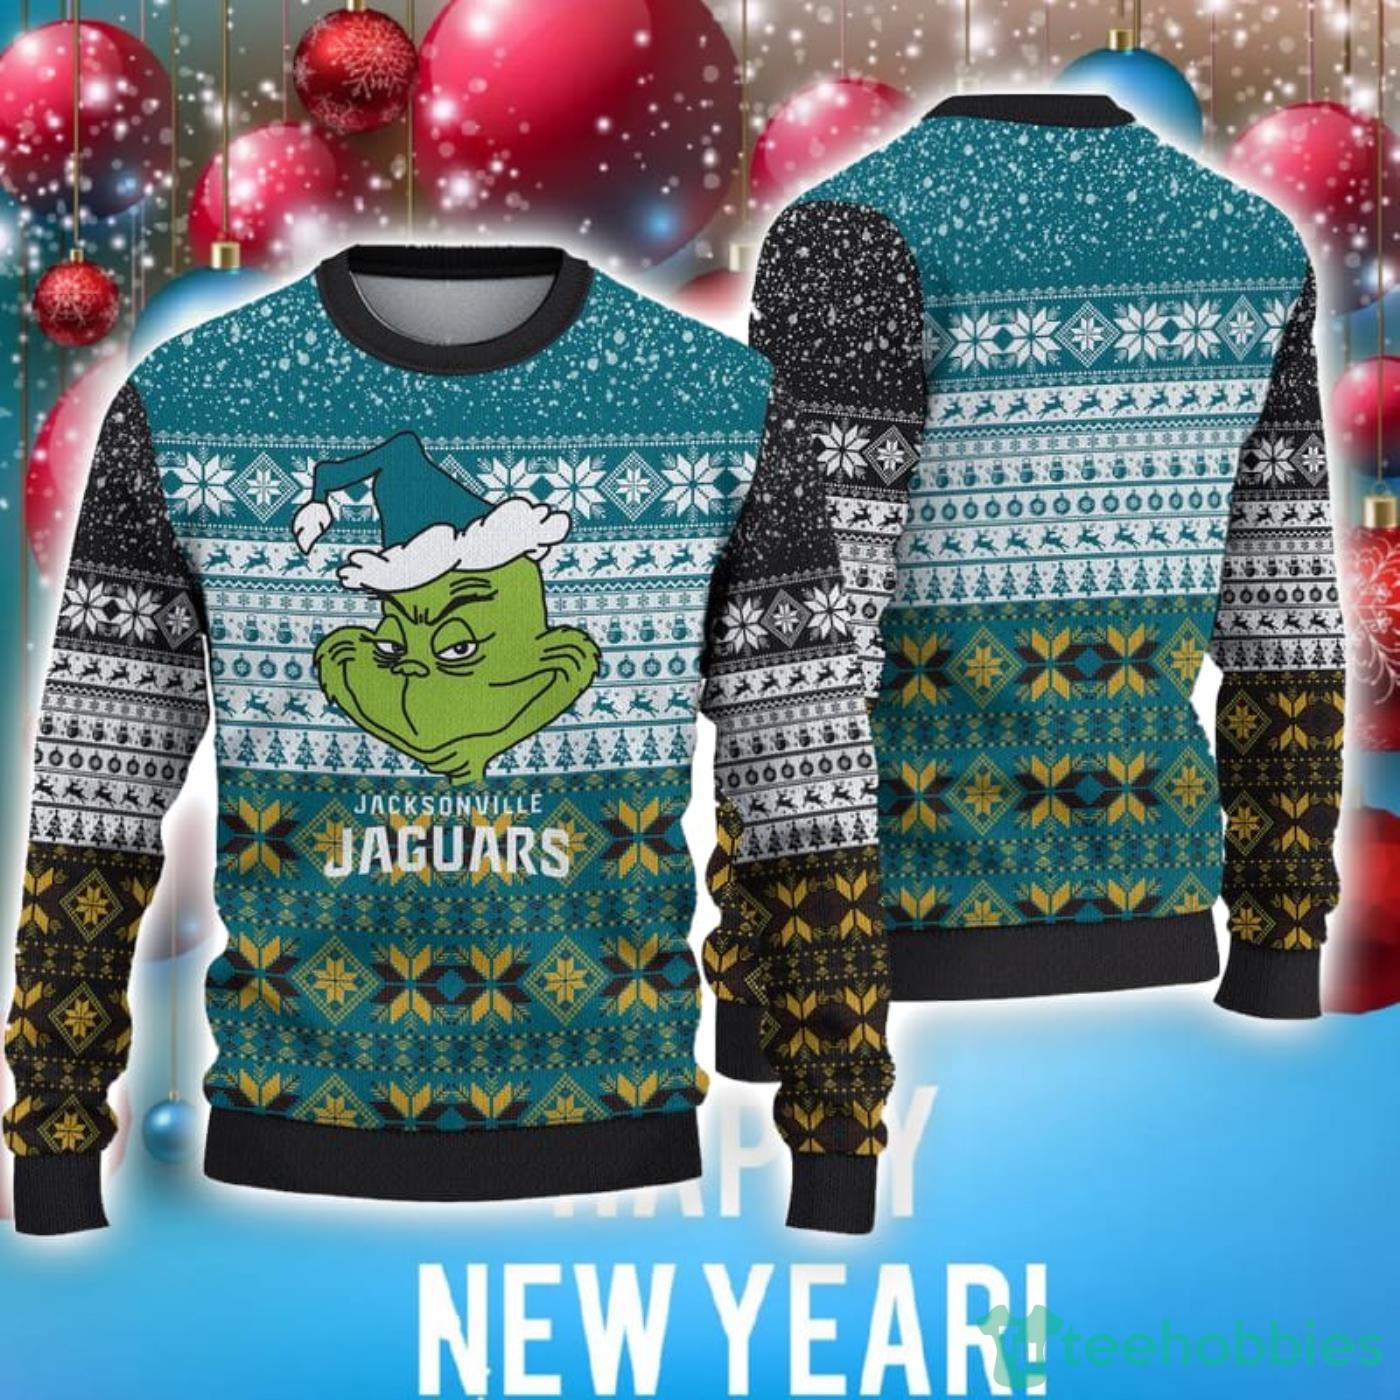 Jacksonville Jaguars Christmas Grch Special Trend Ugly Christmas Sweater Product Photo 1